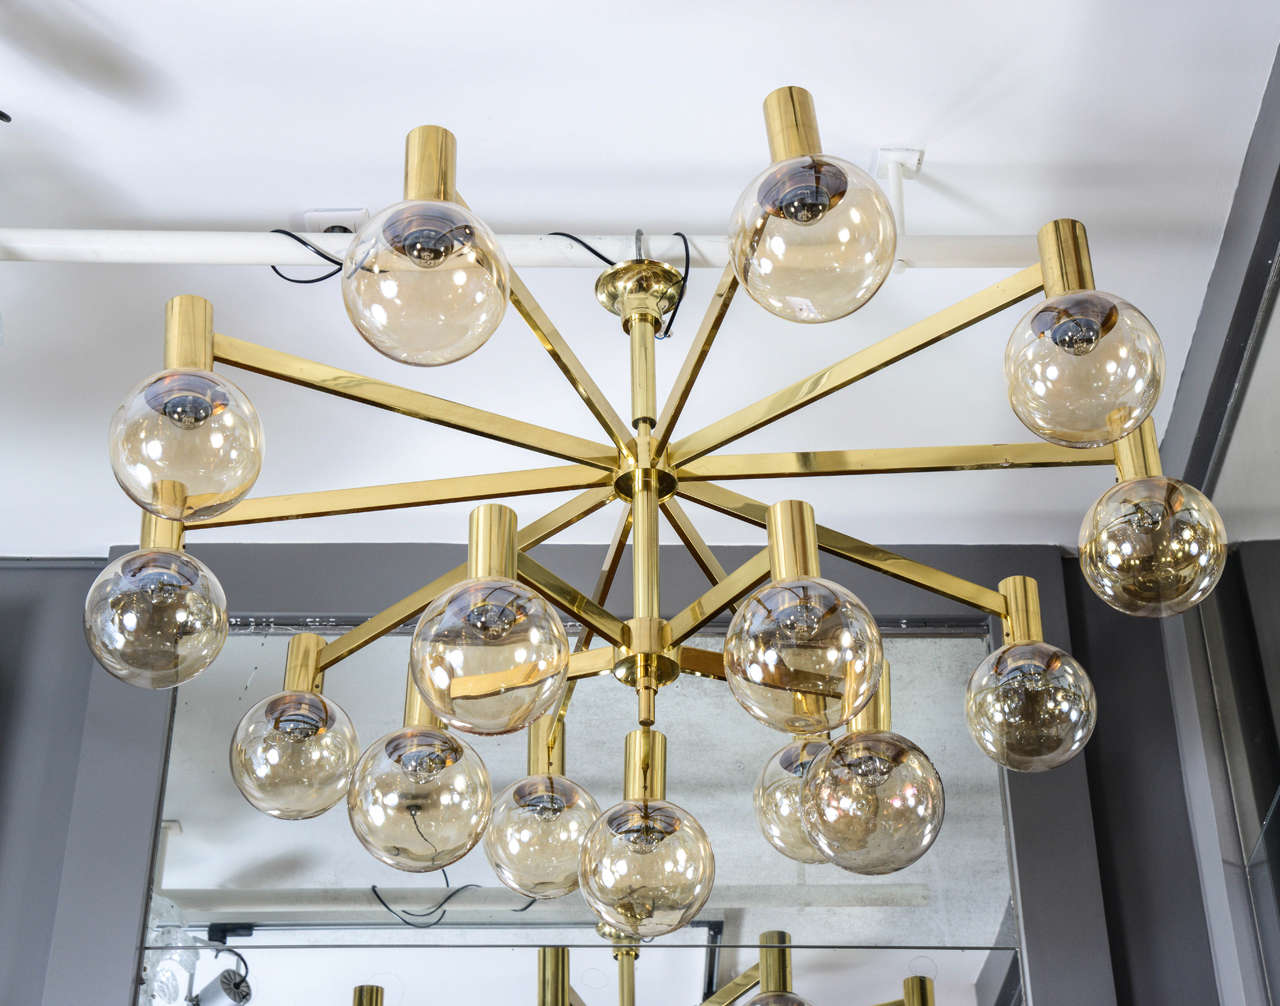 Rare chandelier designed by Hans-Agne Jakobsson made of a brass structure with two levels of arms. Each of the fifteen-arm of light is supporting a tinted blown glass globe.